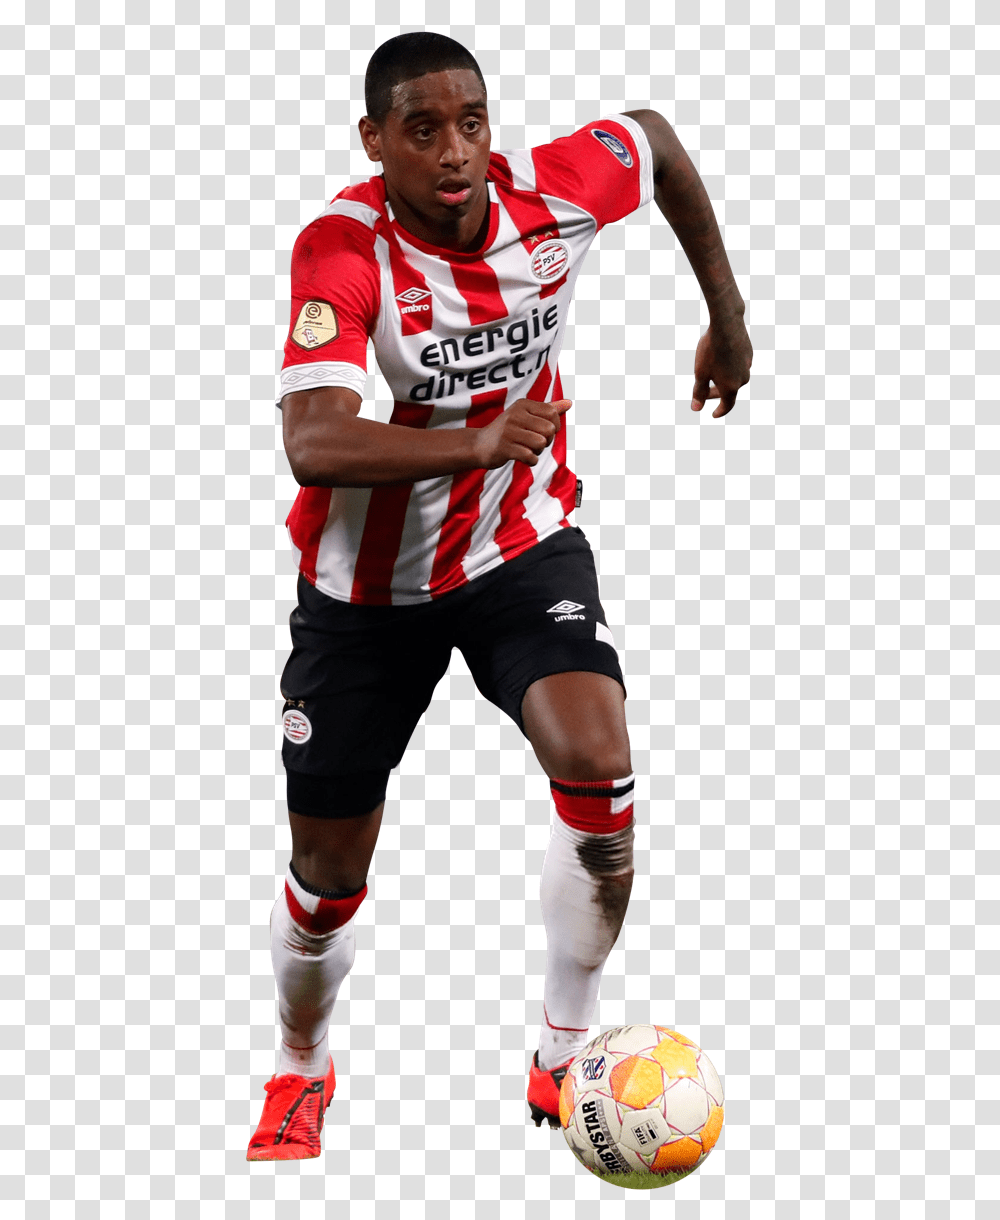 Pablo Rosario Football Render 51957 Footyrenders Player, Shorts, Clothing, Person, Soccer Ball Transparent Png